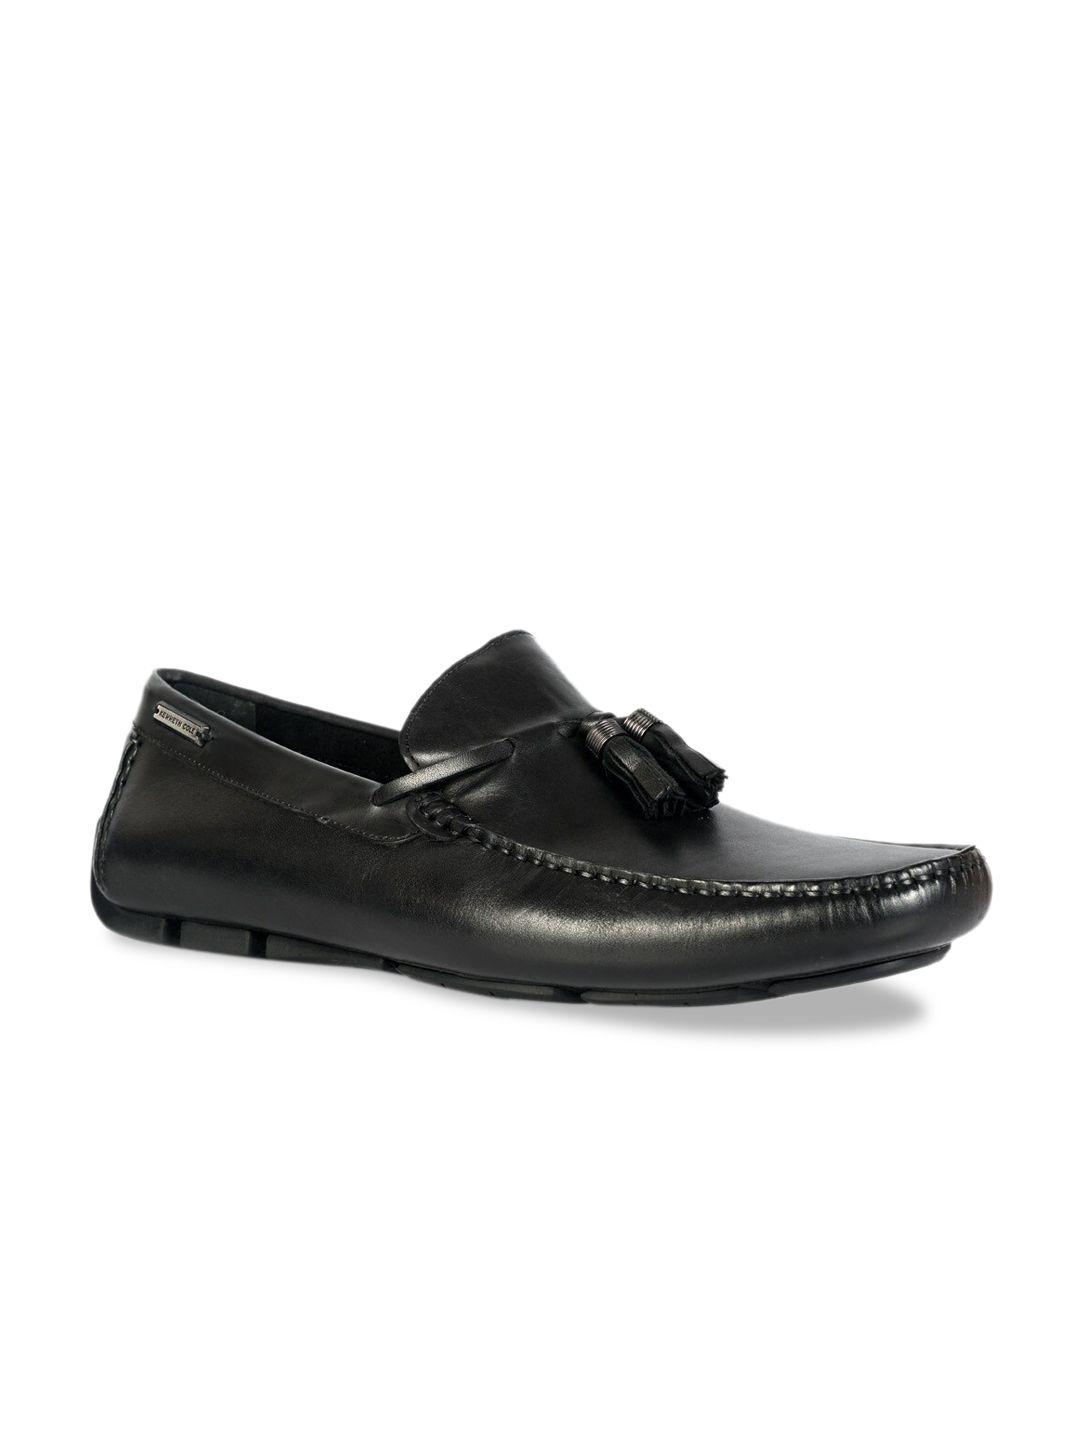 kenneth-cole-men-black-solid-leather-formal-driving-shoes